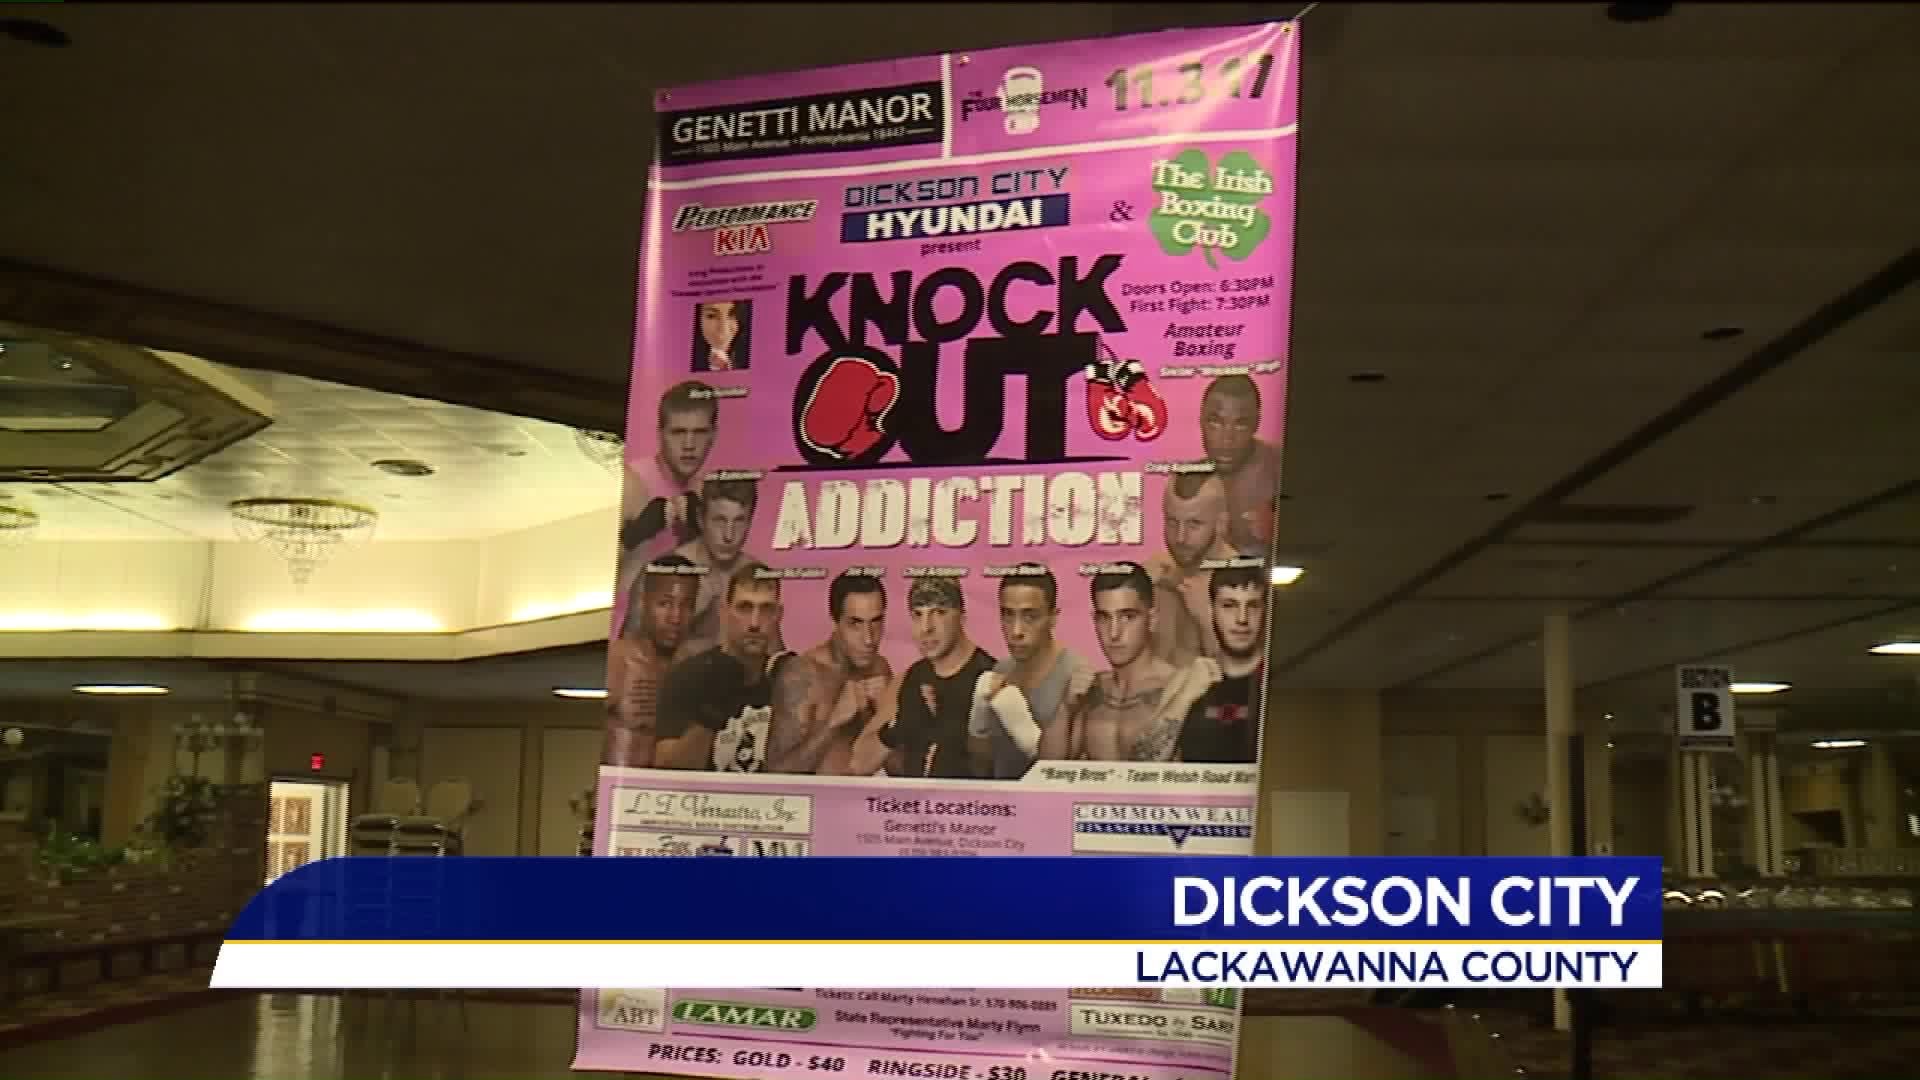 Boxing Event Plans to "Knock Out Addiction"